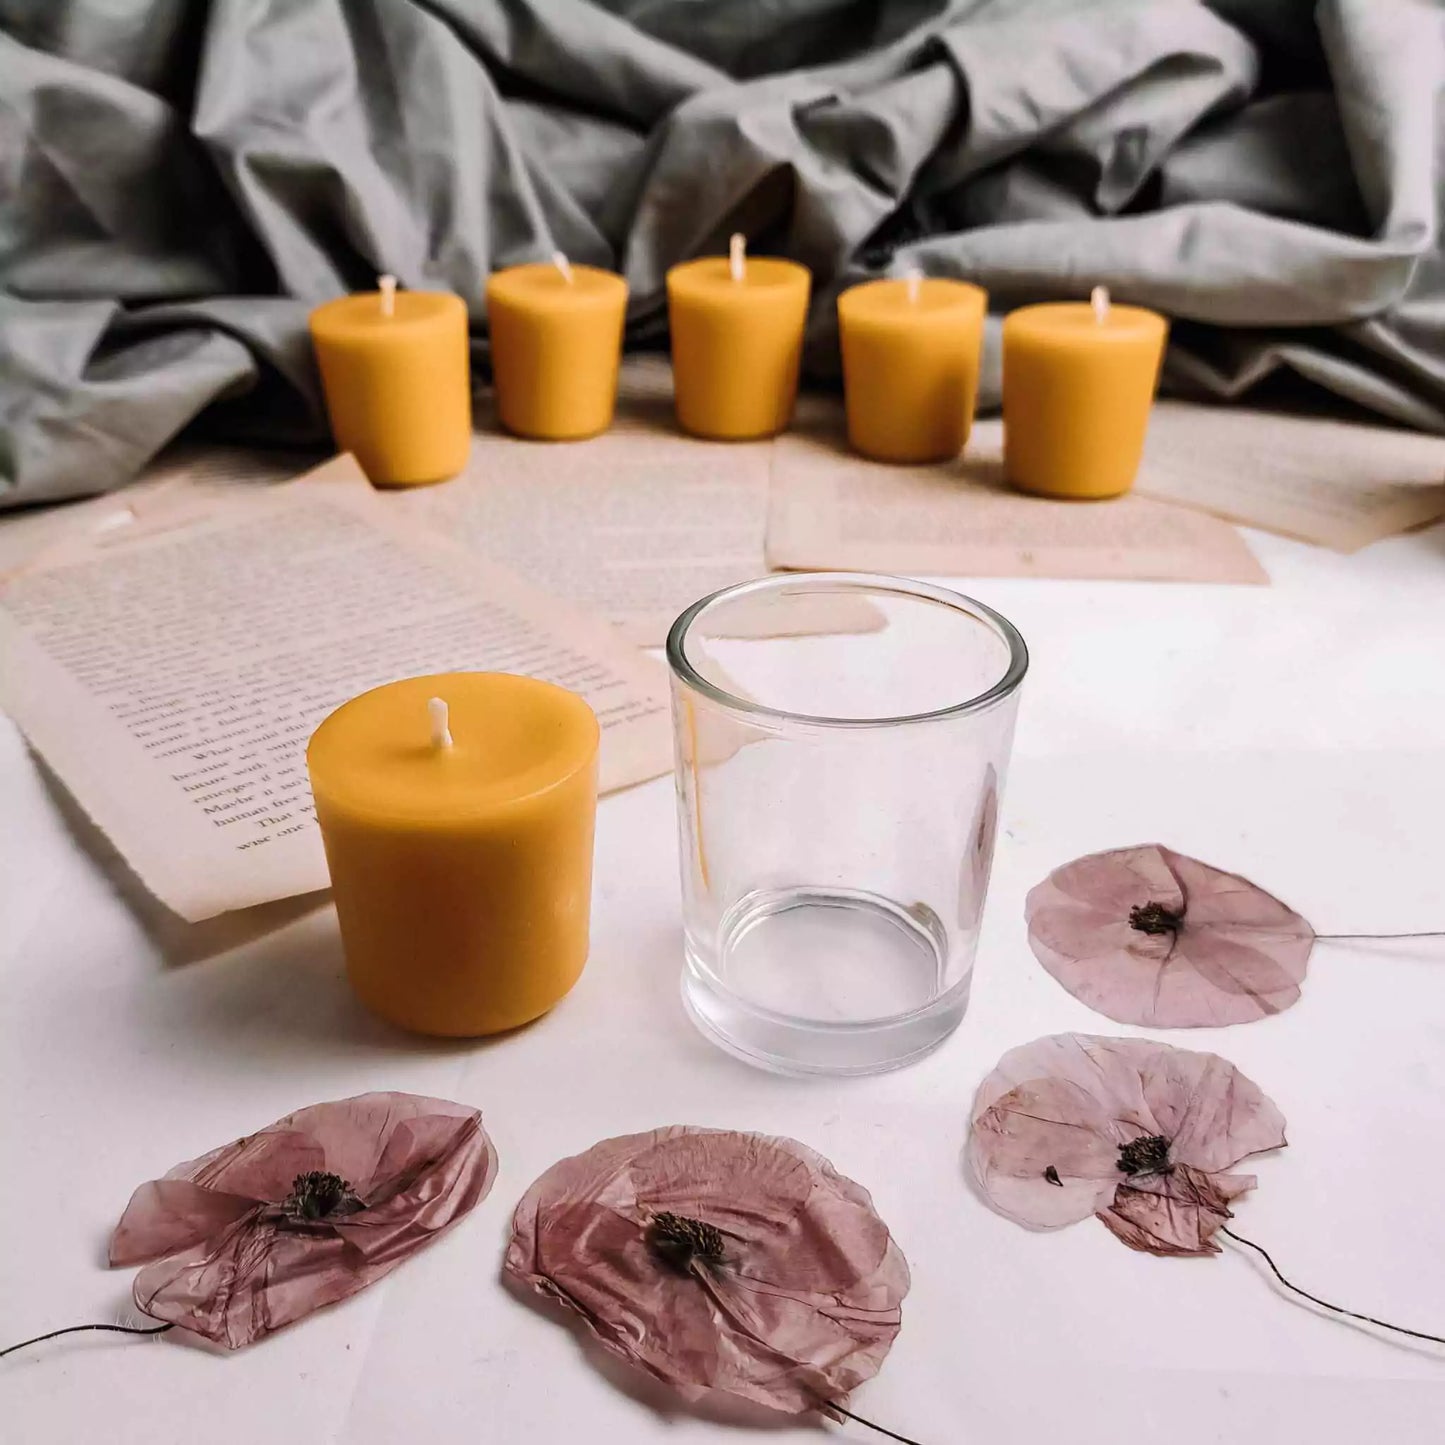 Set of smokeless beeswax votives showcasing natural, eco-friendly candle options with a gentle honey aroma